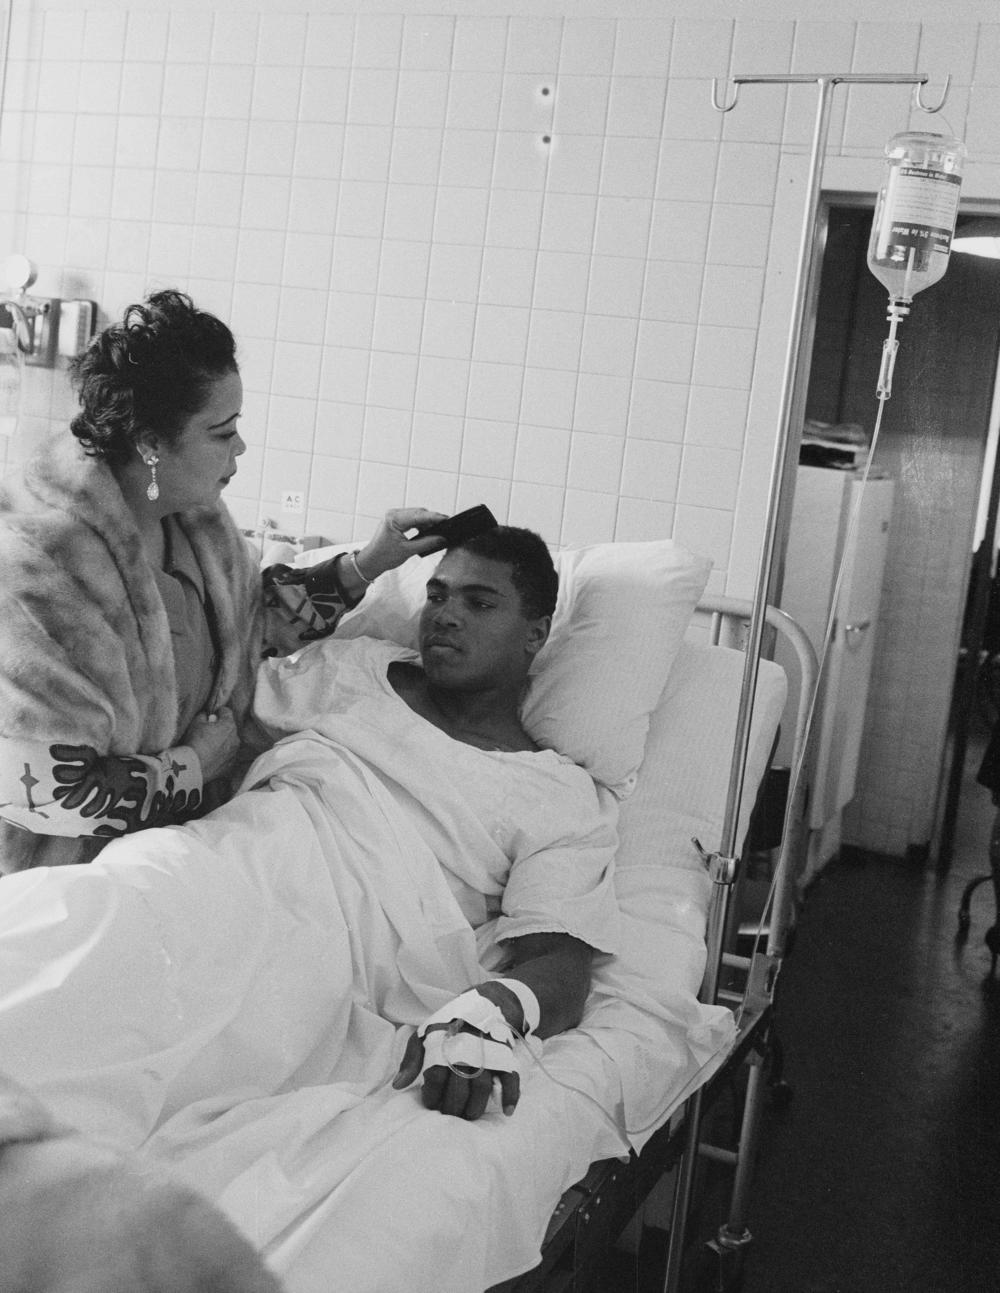 Muhammad Ali's mother, Odessa O'Grady Clay, visits the boxer in a Boston hospital as he recuperates from the hernia operation that forced postponement of his rematch with Joe Frazier. Ted Polumbaum surrendered a roll of unexposed film to Ali's guards and got the picture to LIFE magazine.